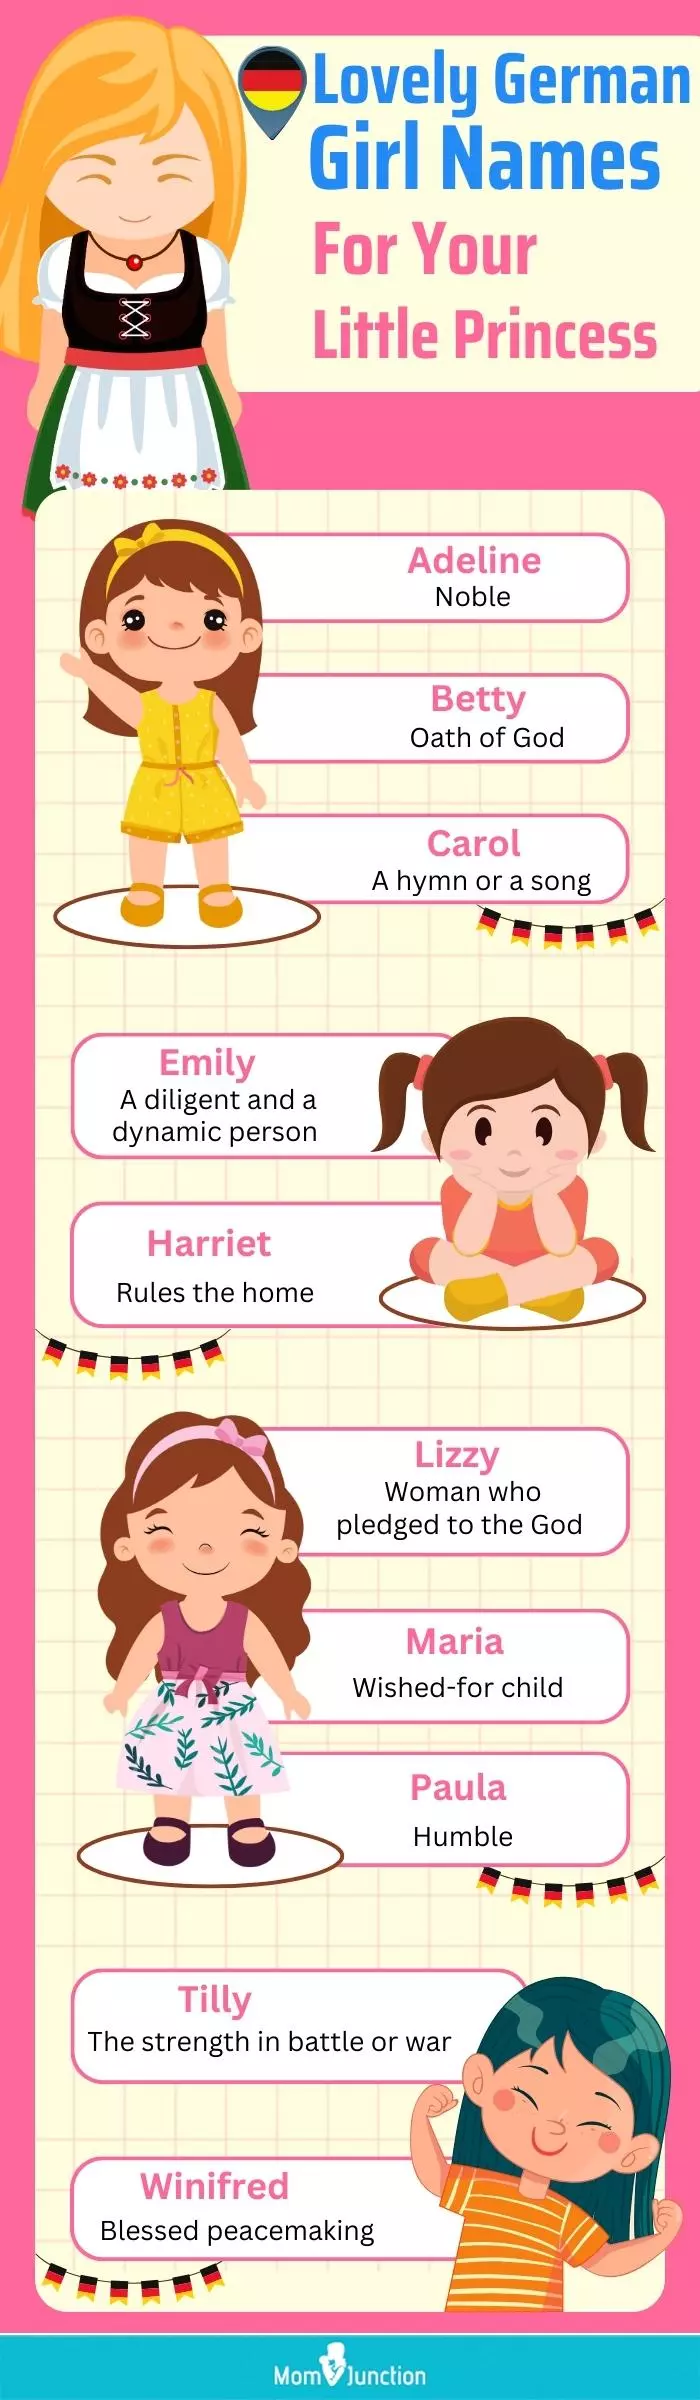 lovely german girl names for your little princess (infographic)